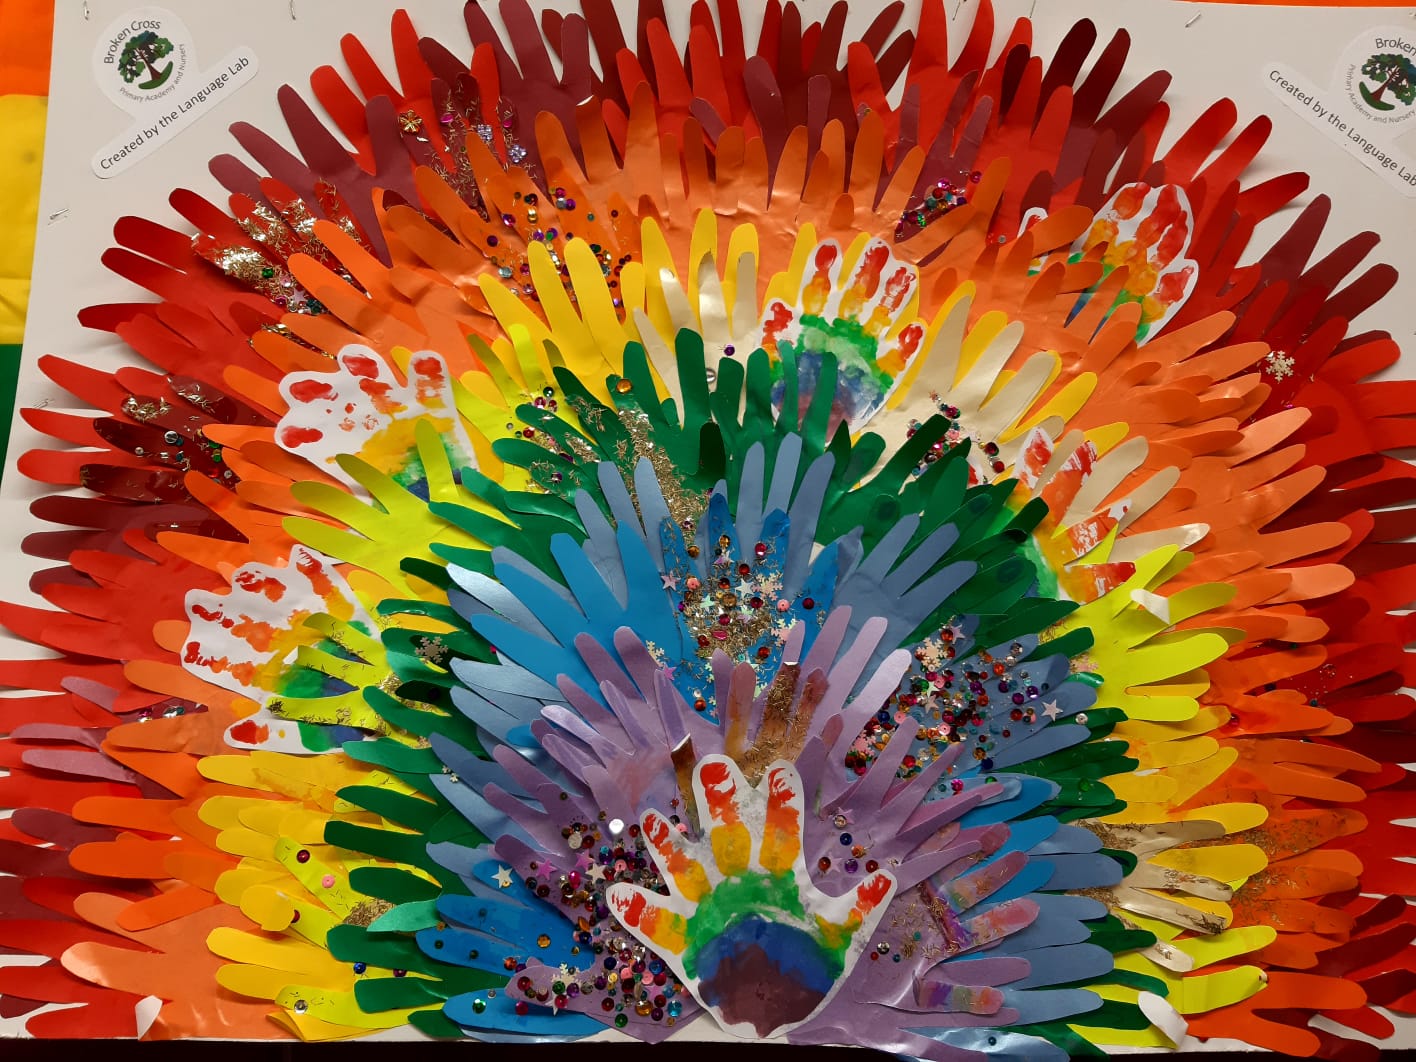 Children's artwork from the Macc Pride hub in the Grosvenor Shopping Centre in Macclesfield. It is a rainbow made out of children's handprints. 